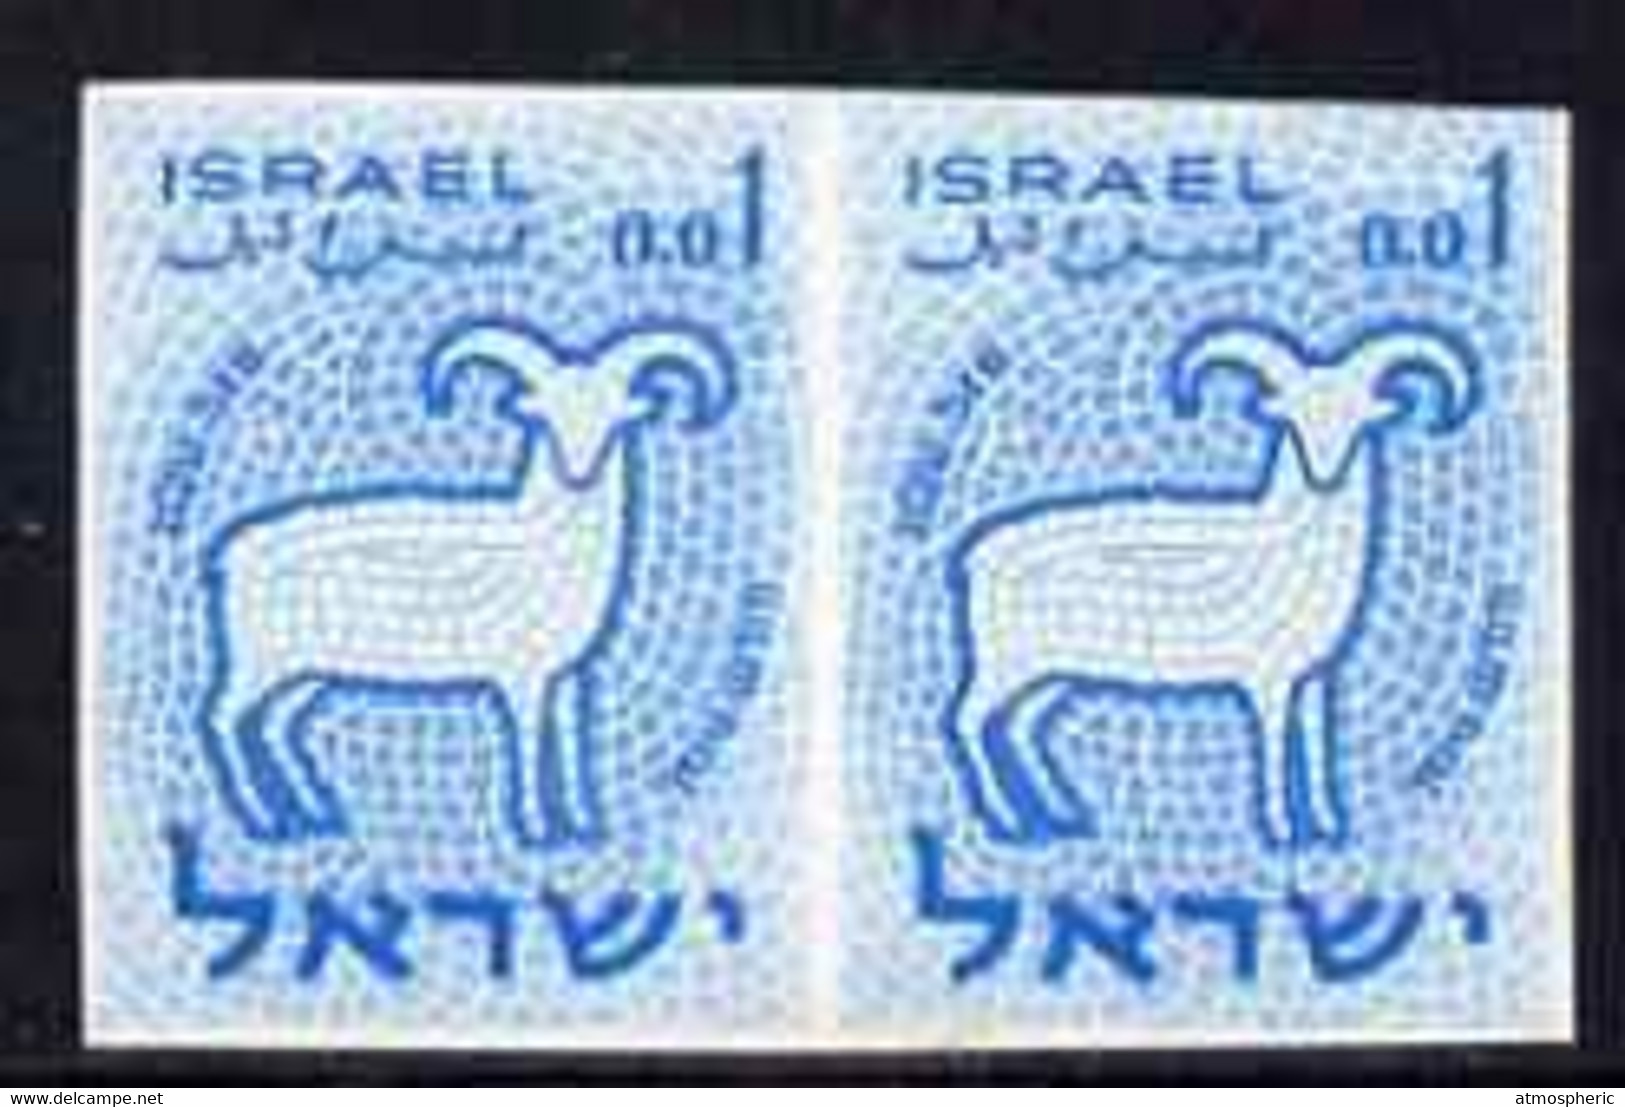 77640 Israel 1961 Zodiac 1a Aries Imperf Pair In Blue (issued Stamp Was Emerald) From The Only Sheet Known U/M - Non Dentelés, épreuves & Variétés